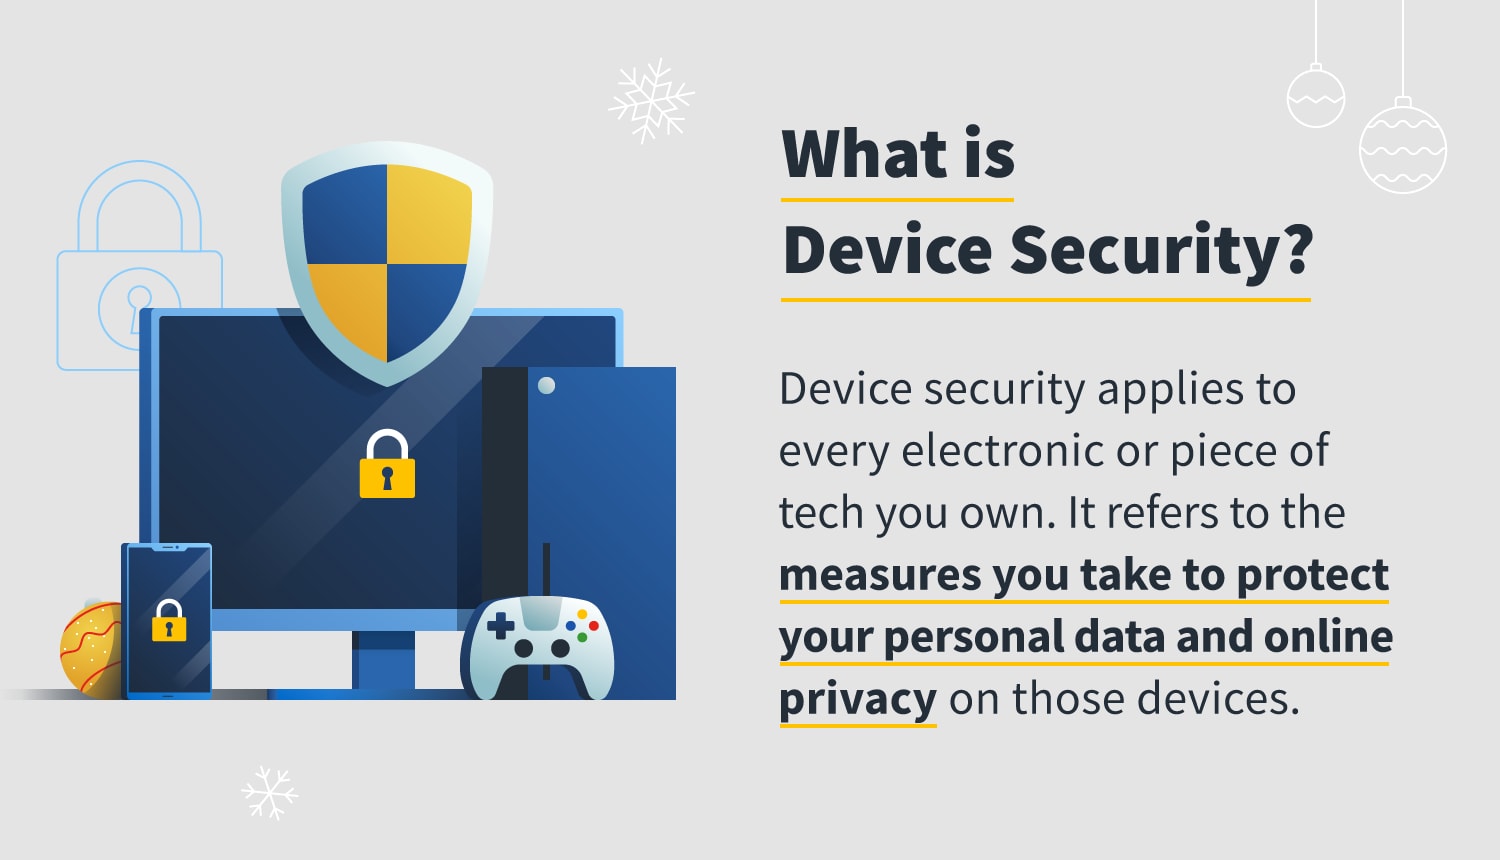 Secure device